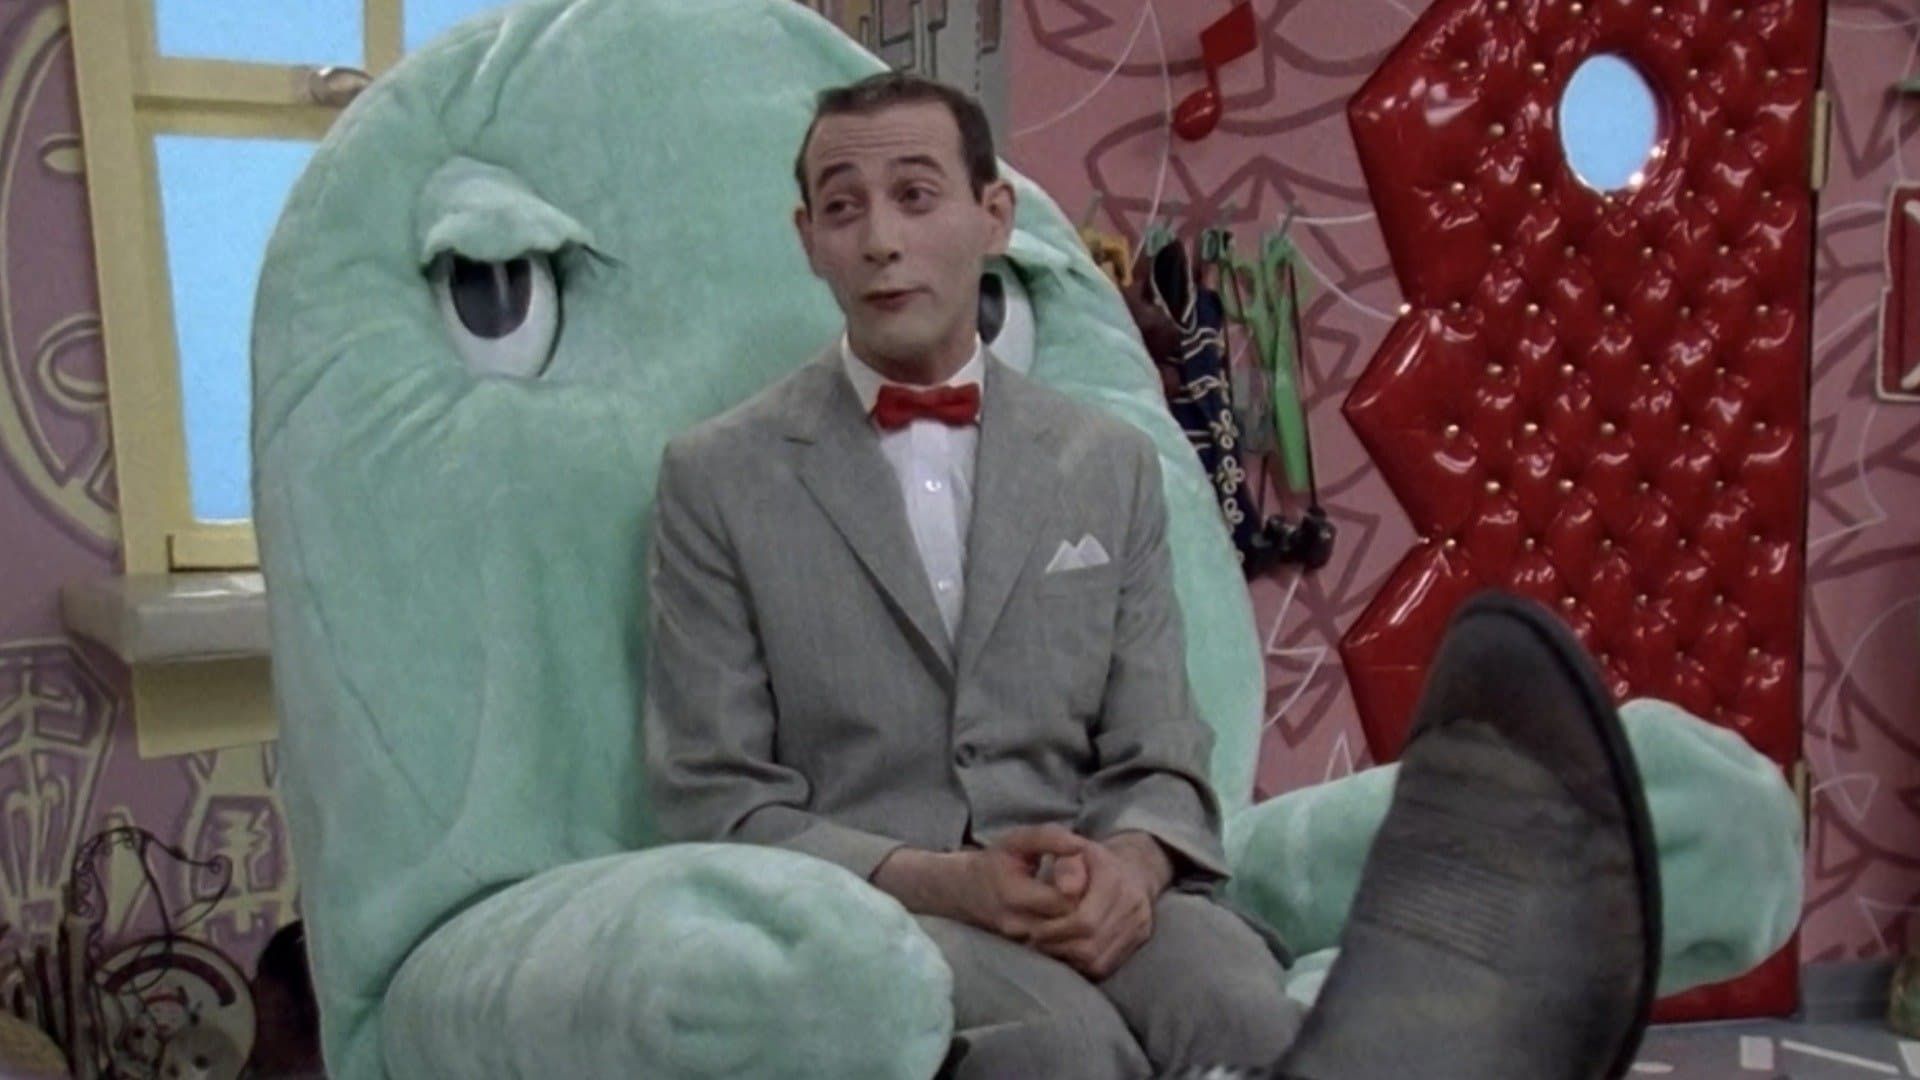 Pee-wee's Playhouse background